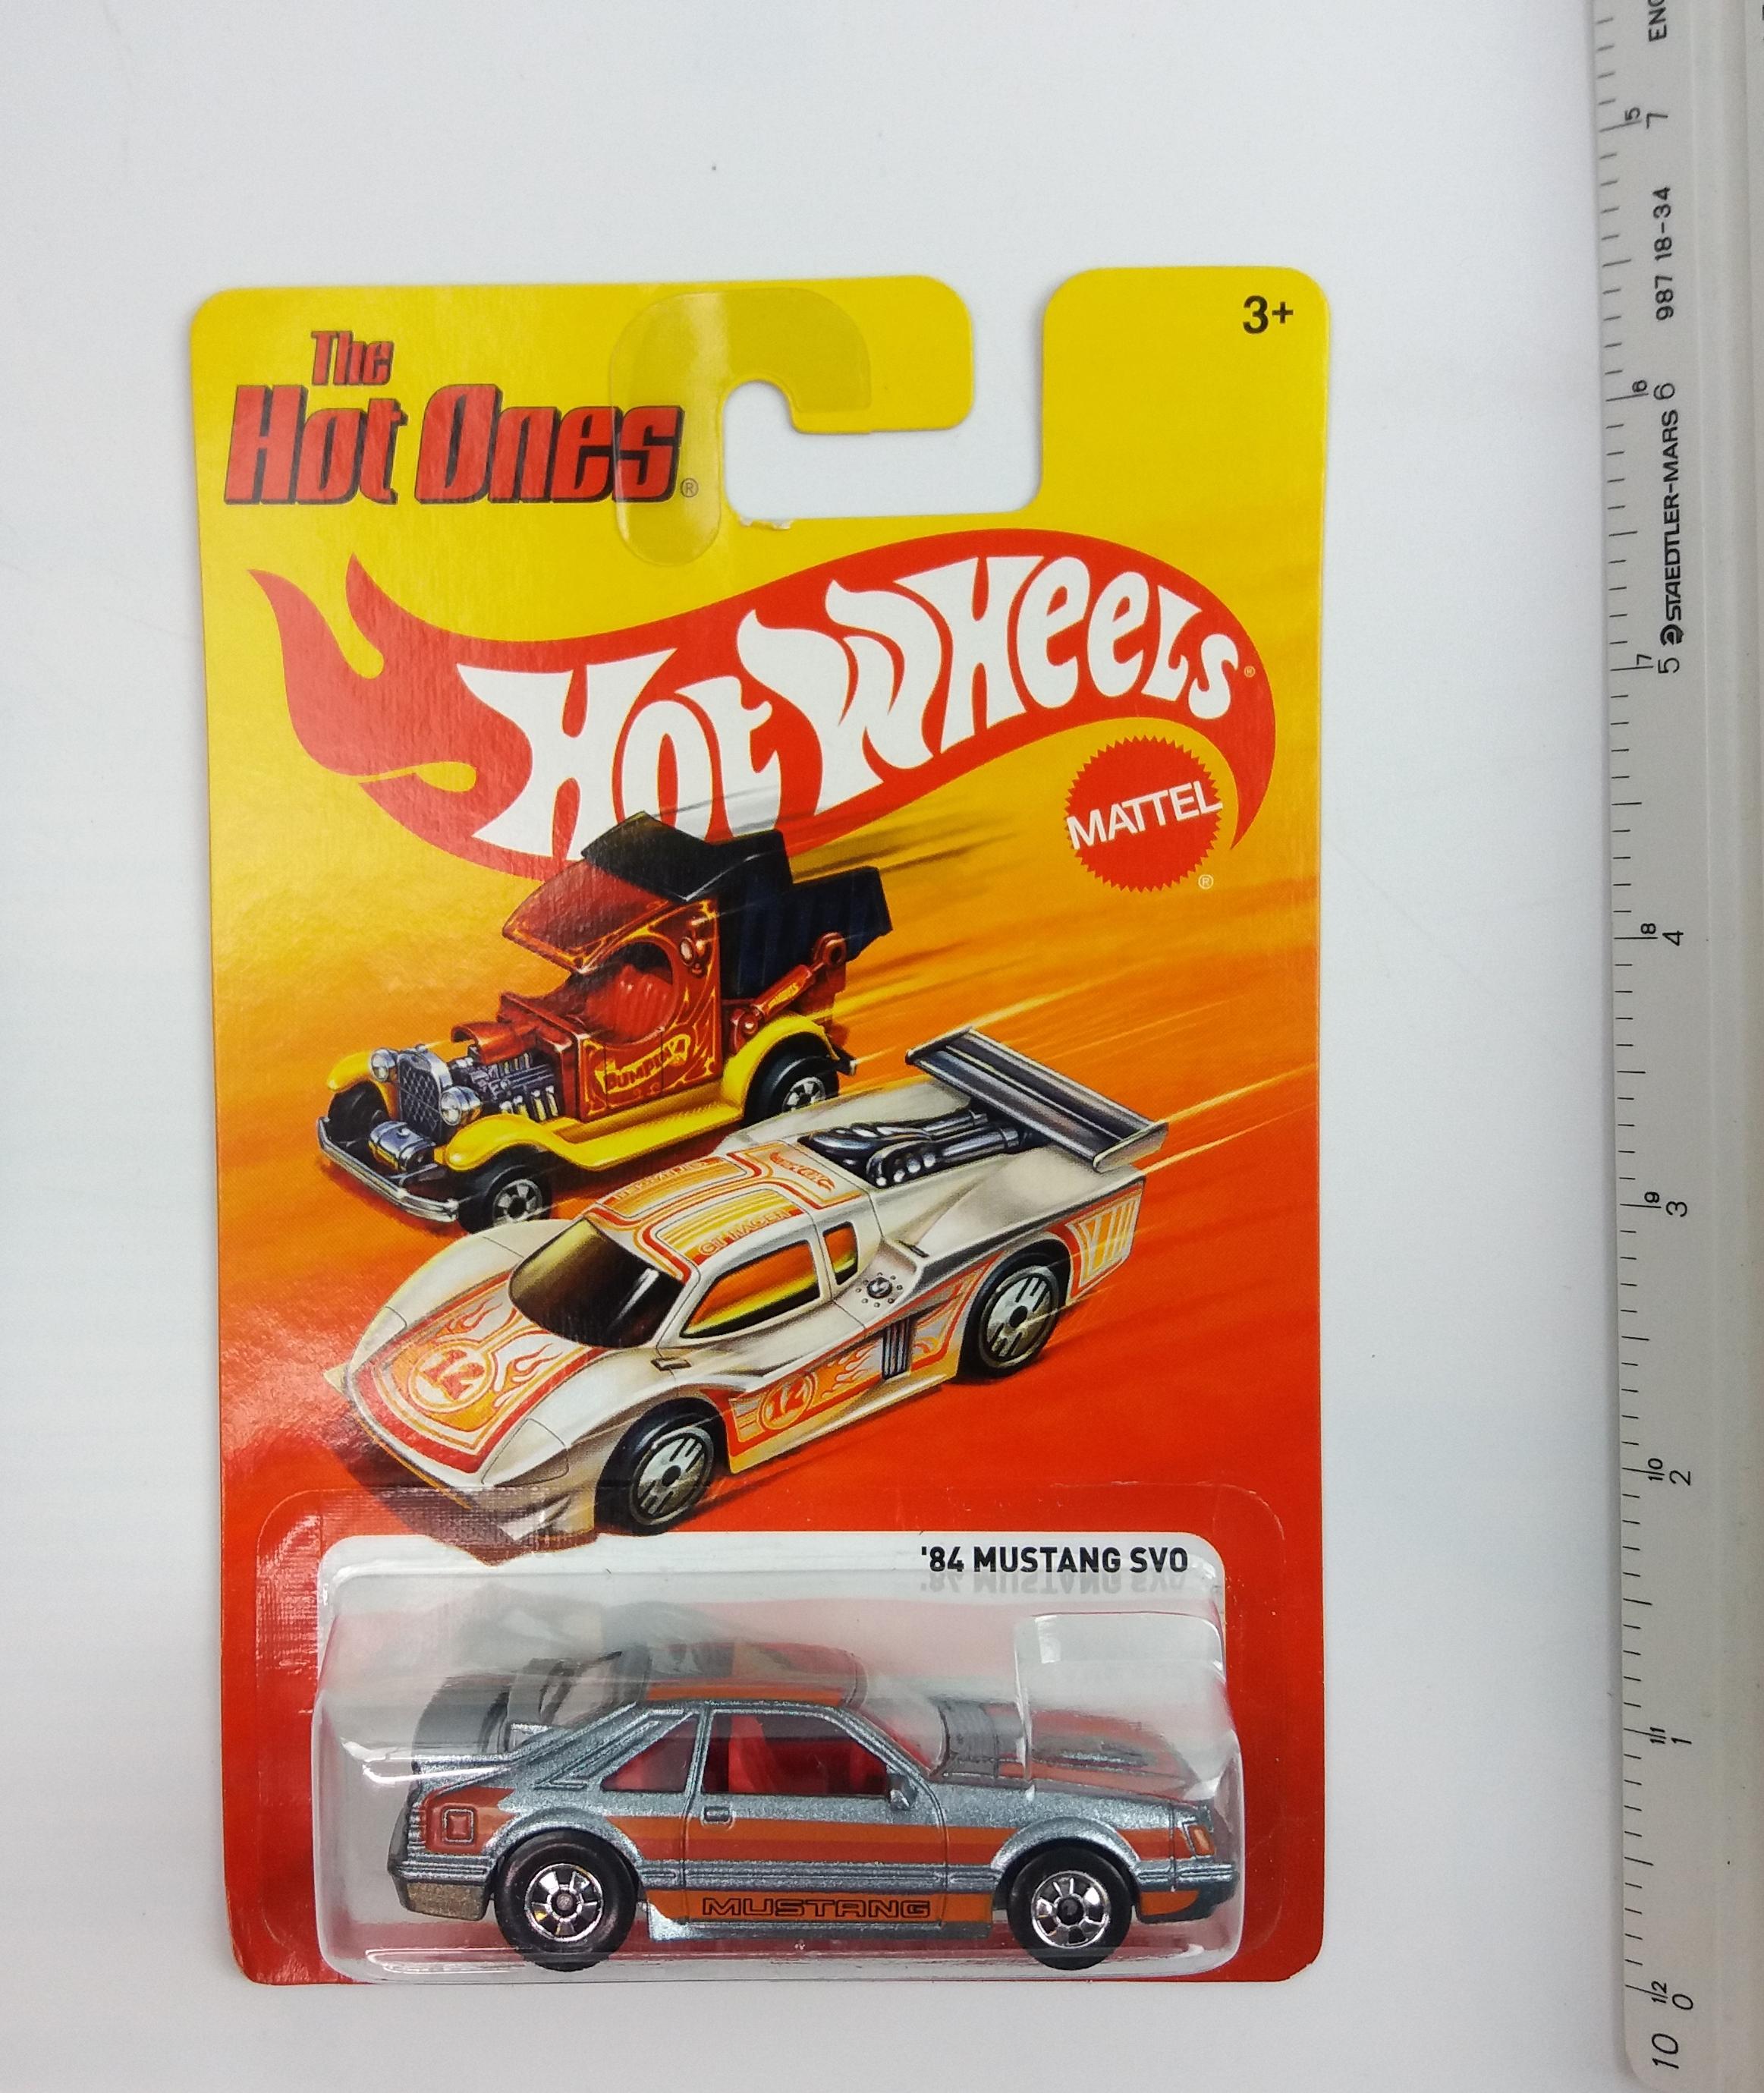 2011 '84 Mustang SVO Hot Wheels The Hot Ones Collectible Diecast Car